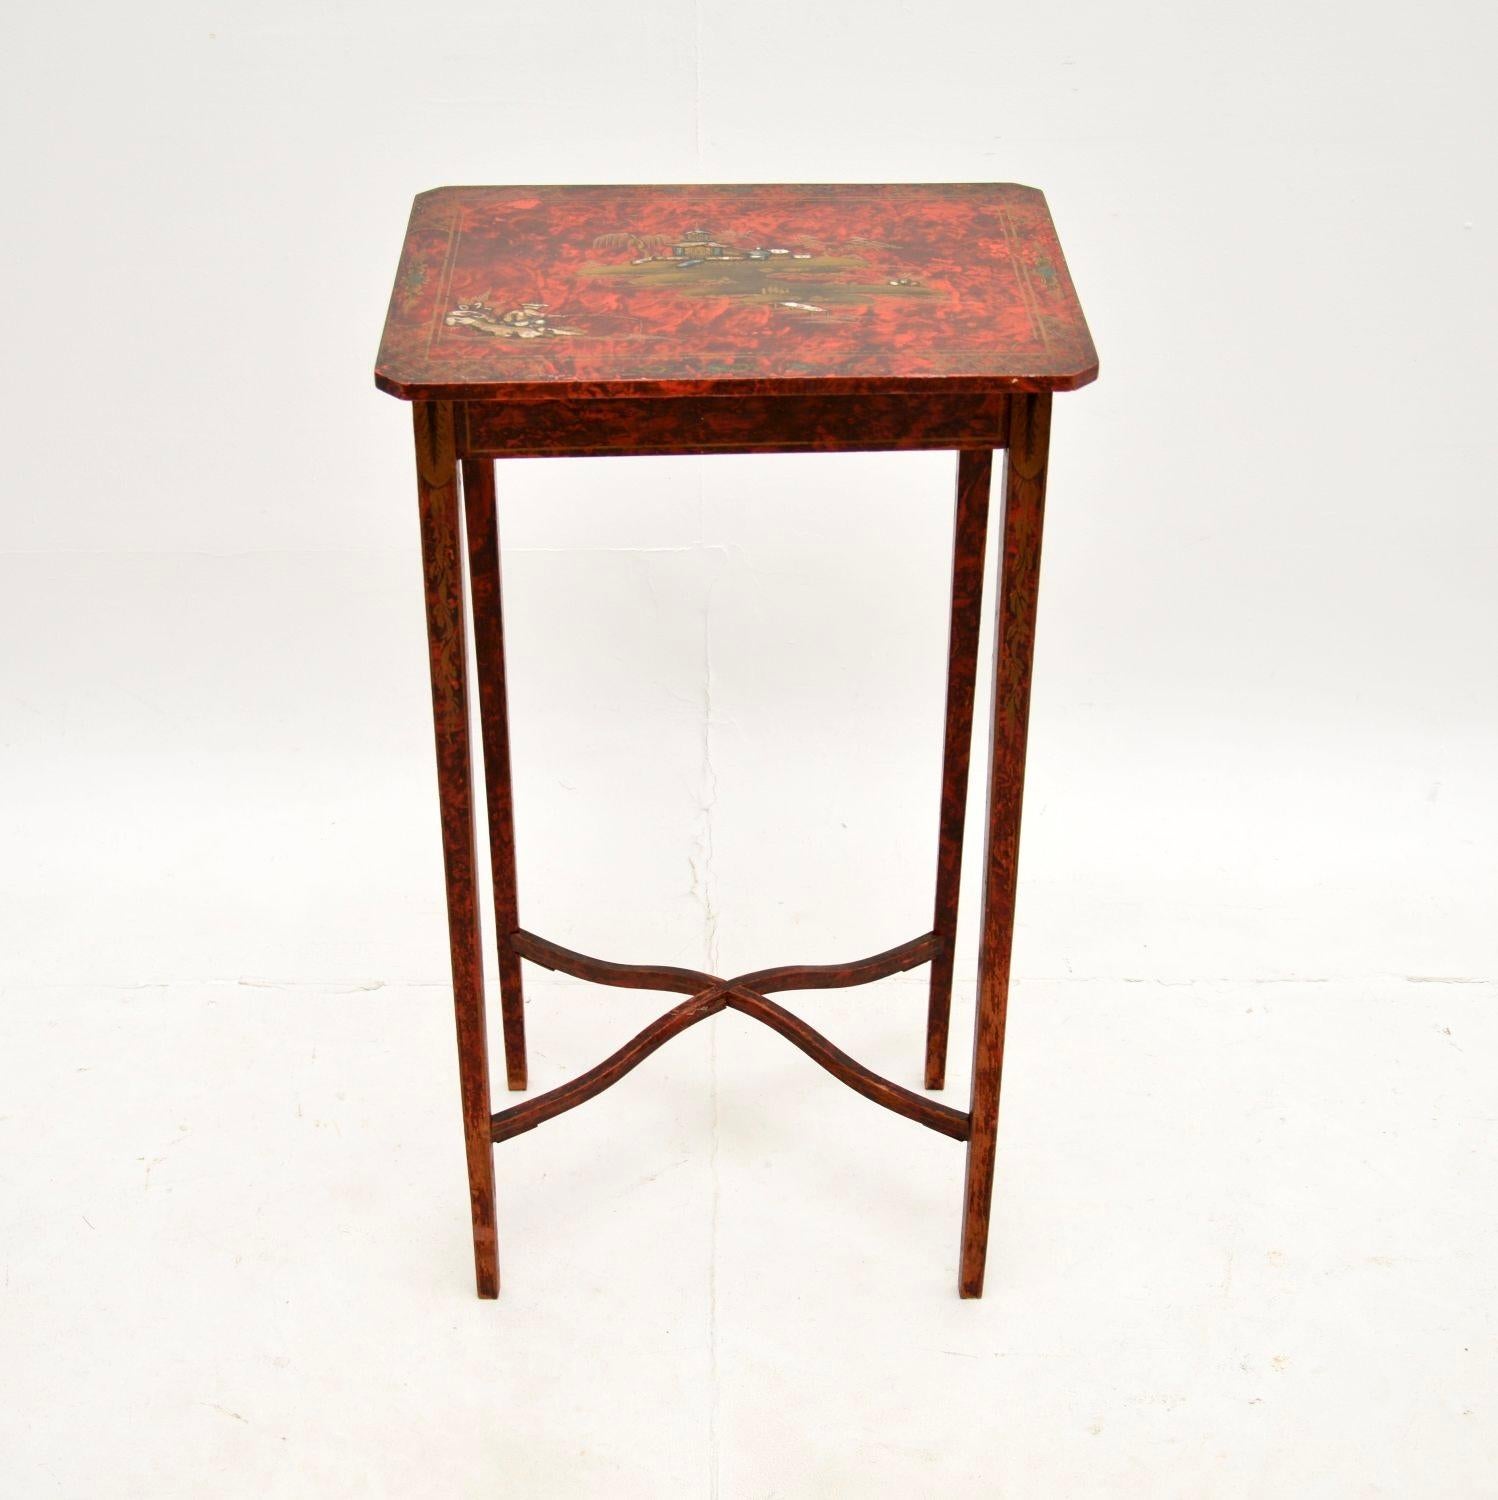 An absolutely stunning antique lacquered chinoiserie side table. This was made in England, it dates from around the 1880-1900 period.

It is of extremely fine quality, with gorgeous lacquered decorations in the classic oriental style. It is a very